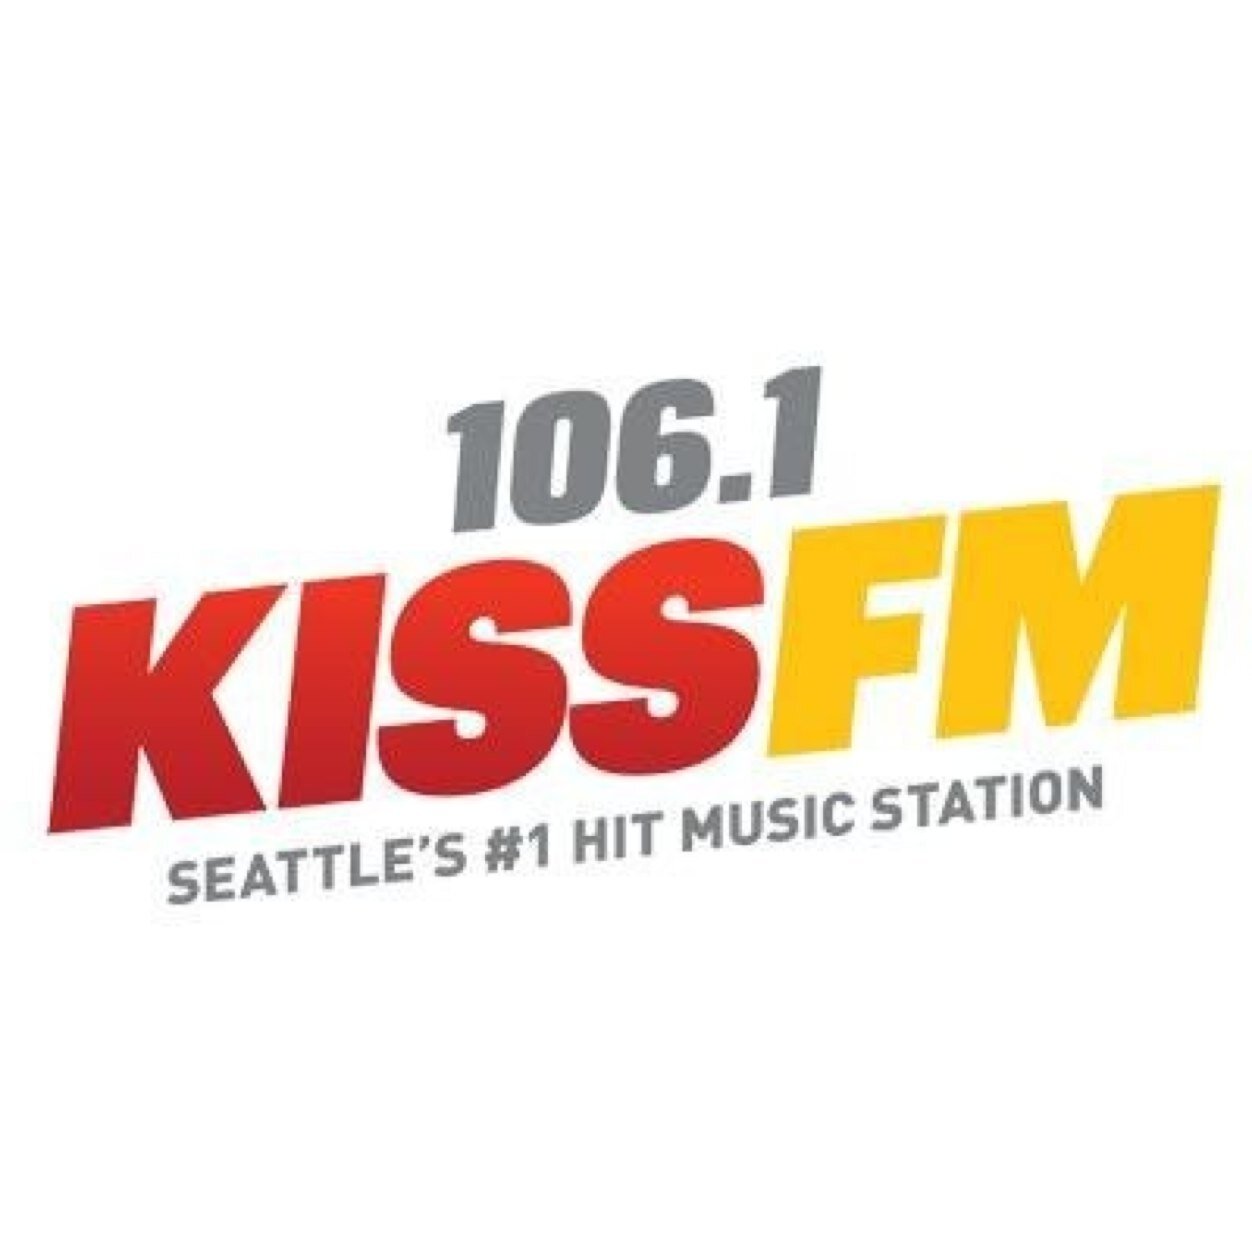 The Official twitter for everything CLUB KISS and KISSFM. Dj Phase, Dj Tamm and Dj Christyle. Friday/Satuday nights. 9pm - 2am